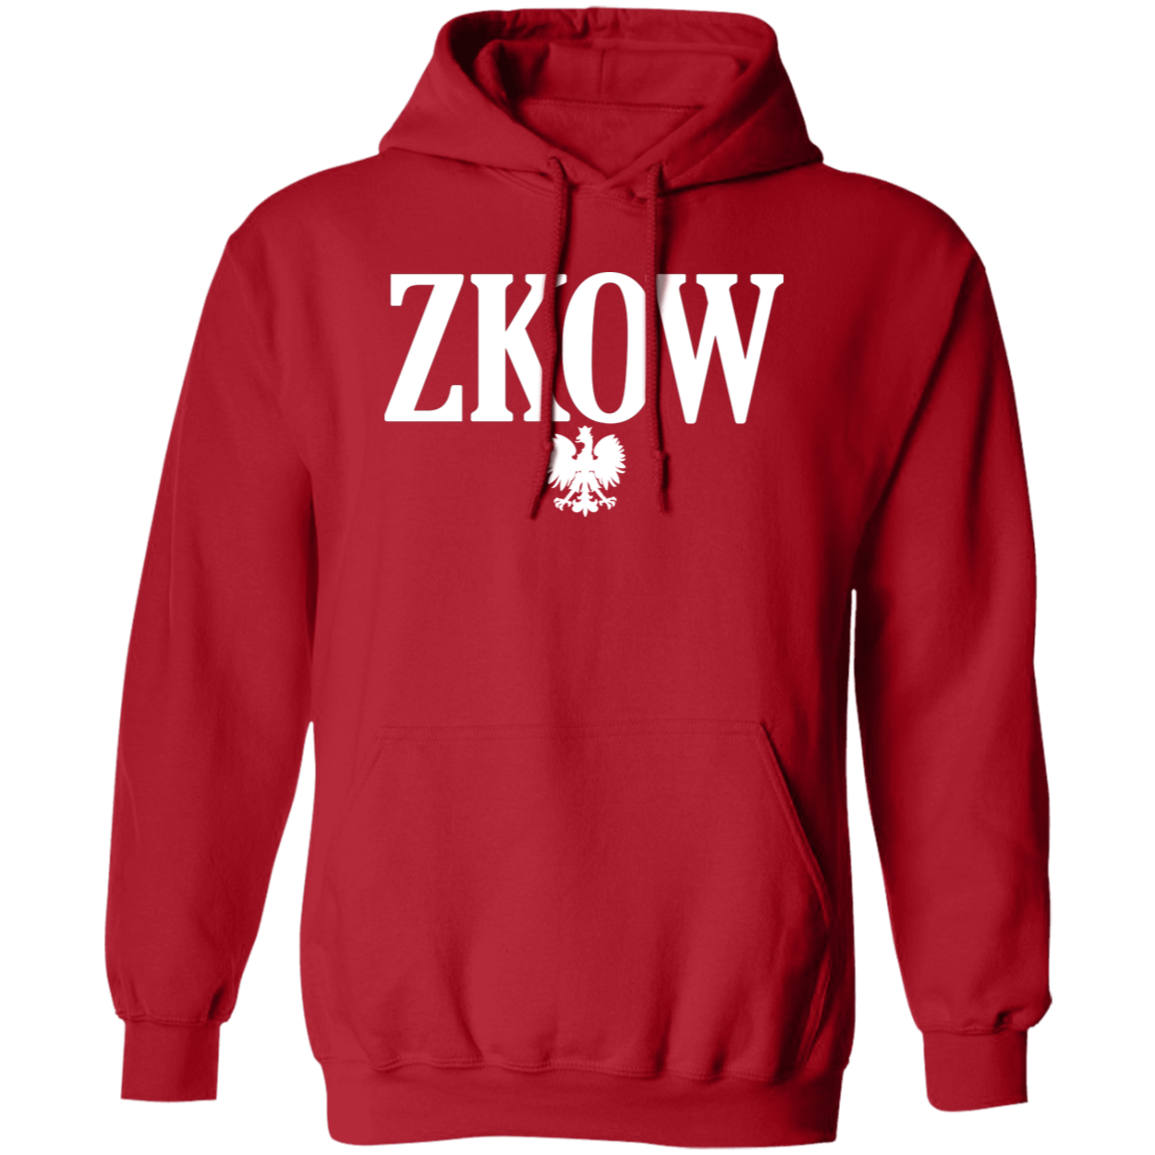 ZKOW Polish Surname Ending Apparel CustomCat G185 Pullover Hoodie Red S